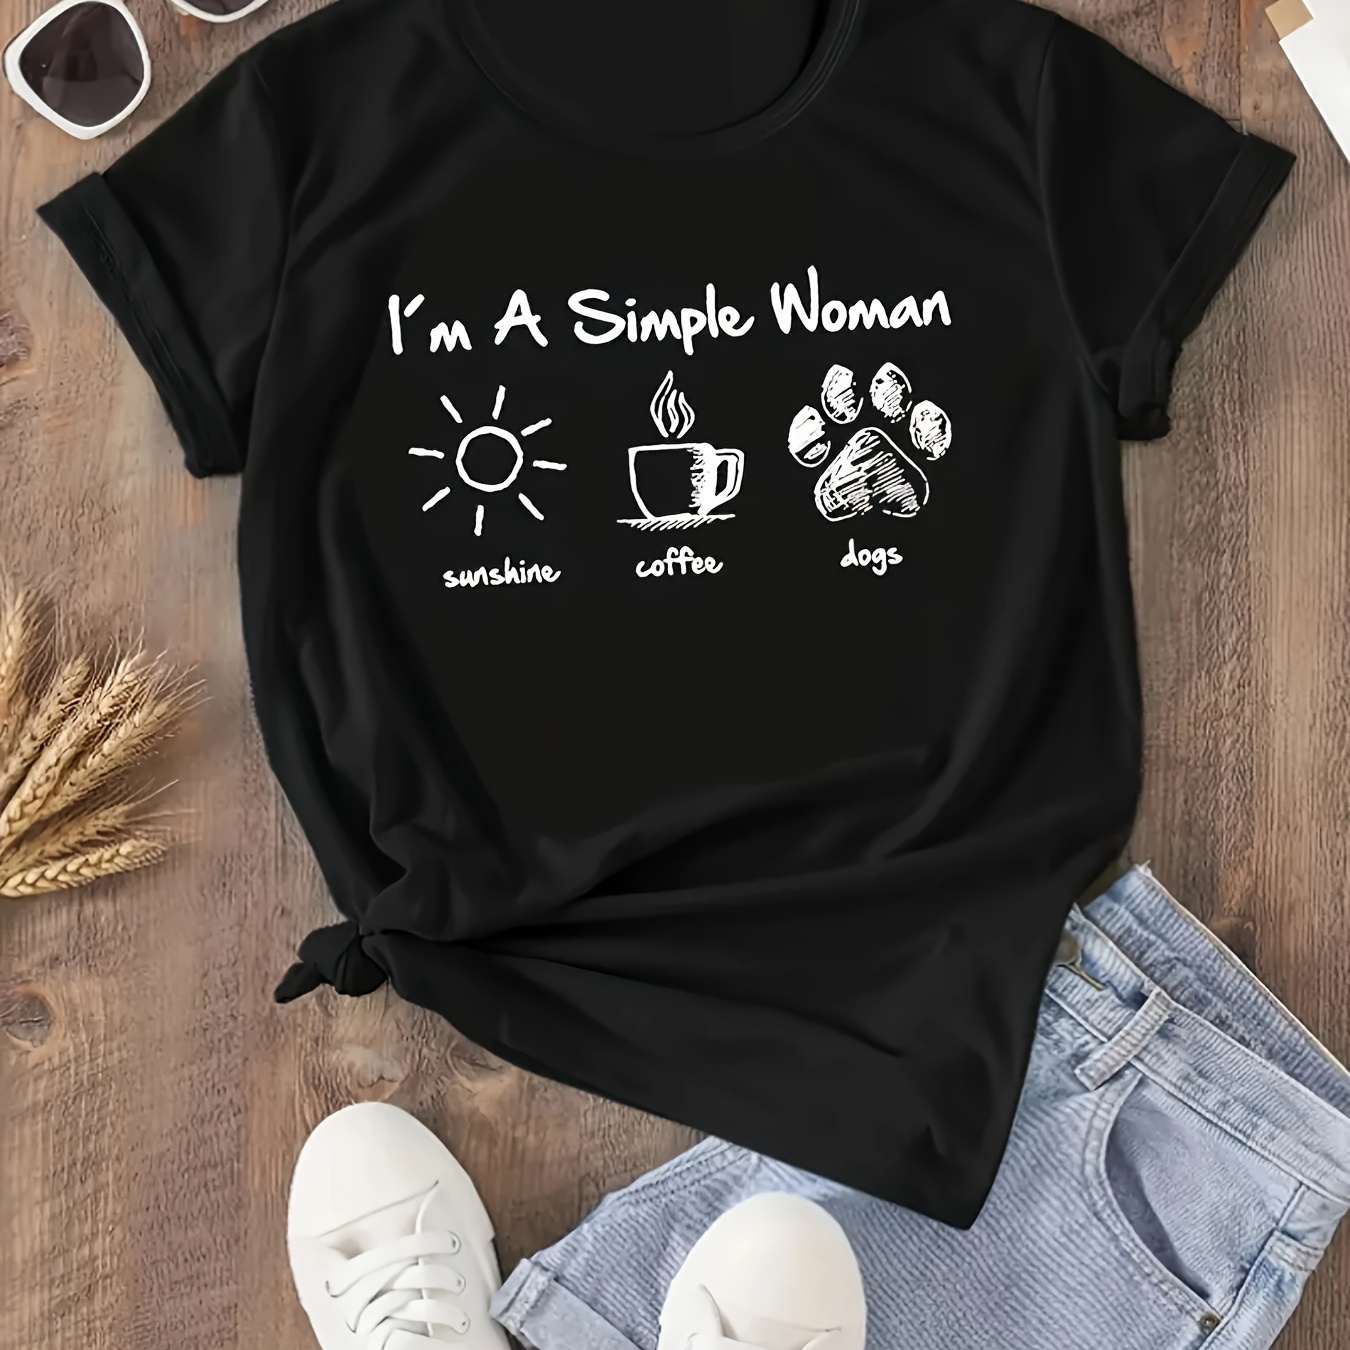 

Sunshine Coffee Dogs Print T-shirt, Short Sleeve Crew Neck Casual Top For Summer & Spring, Women's Clothing